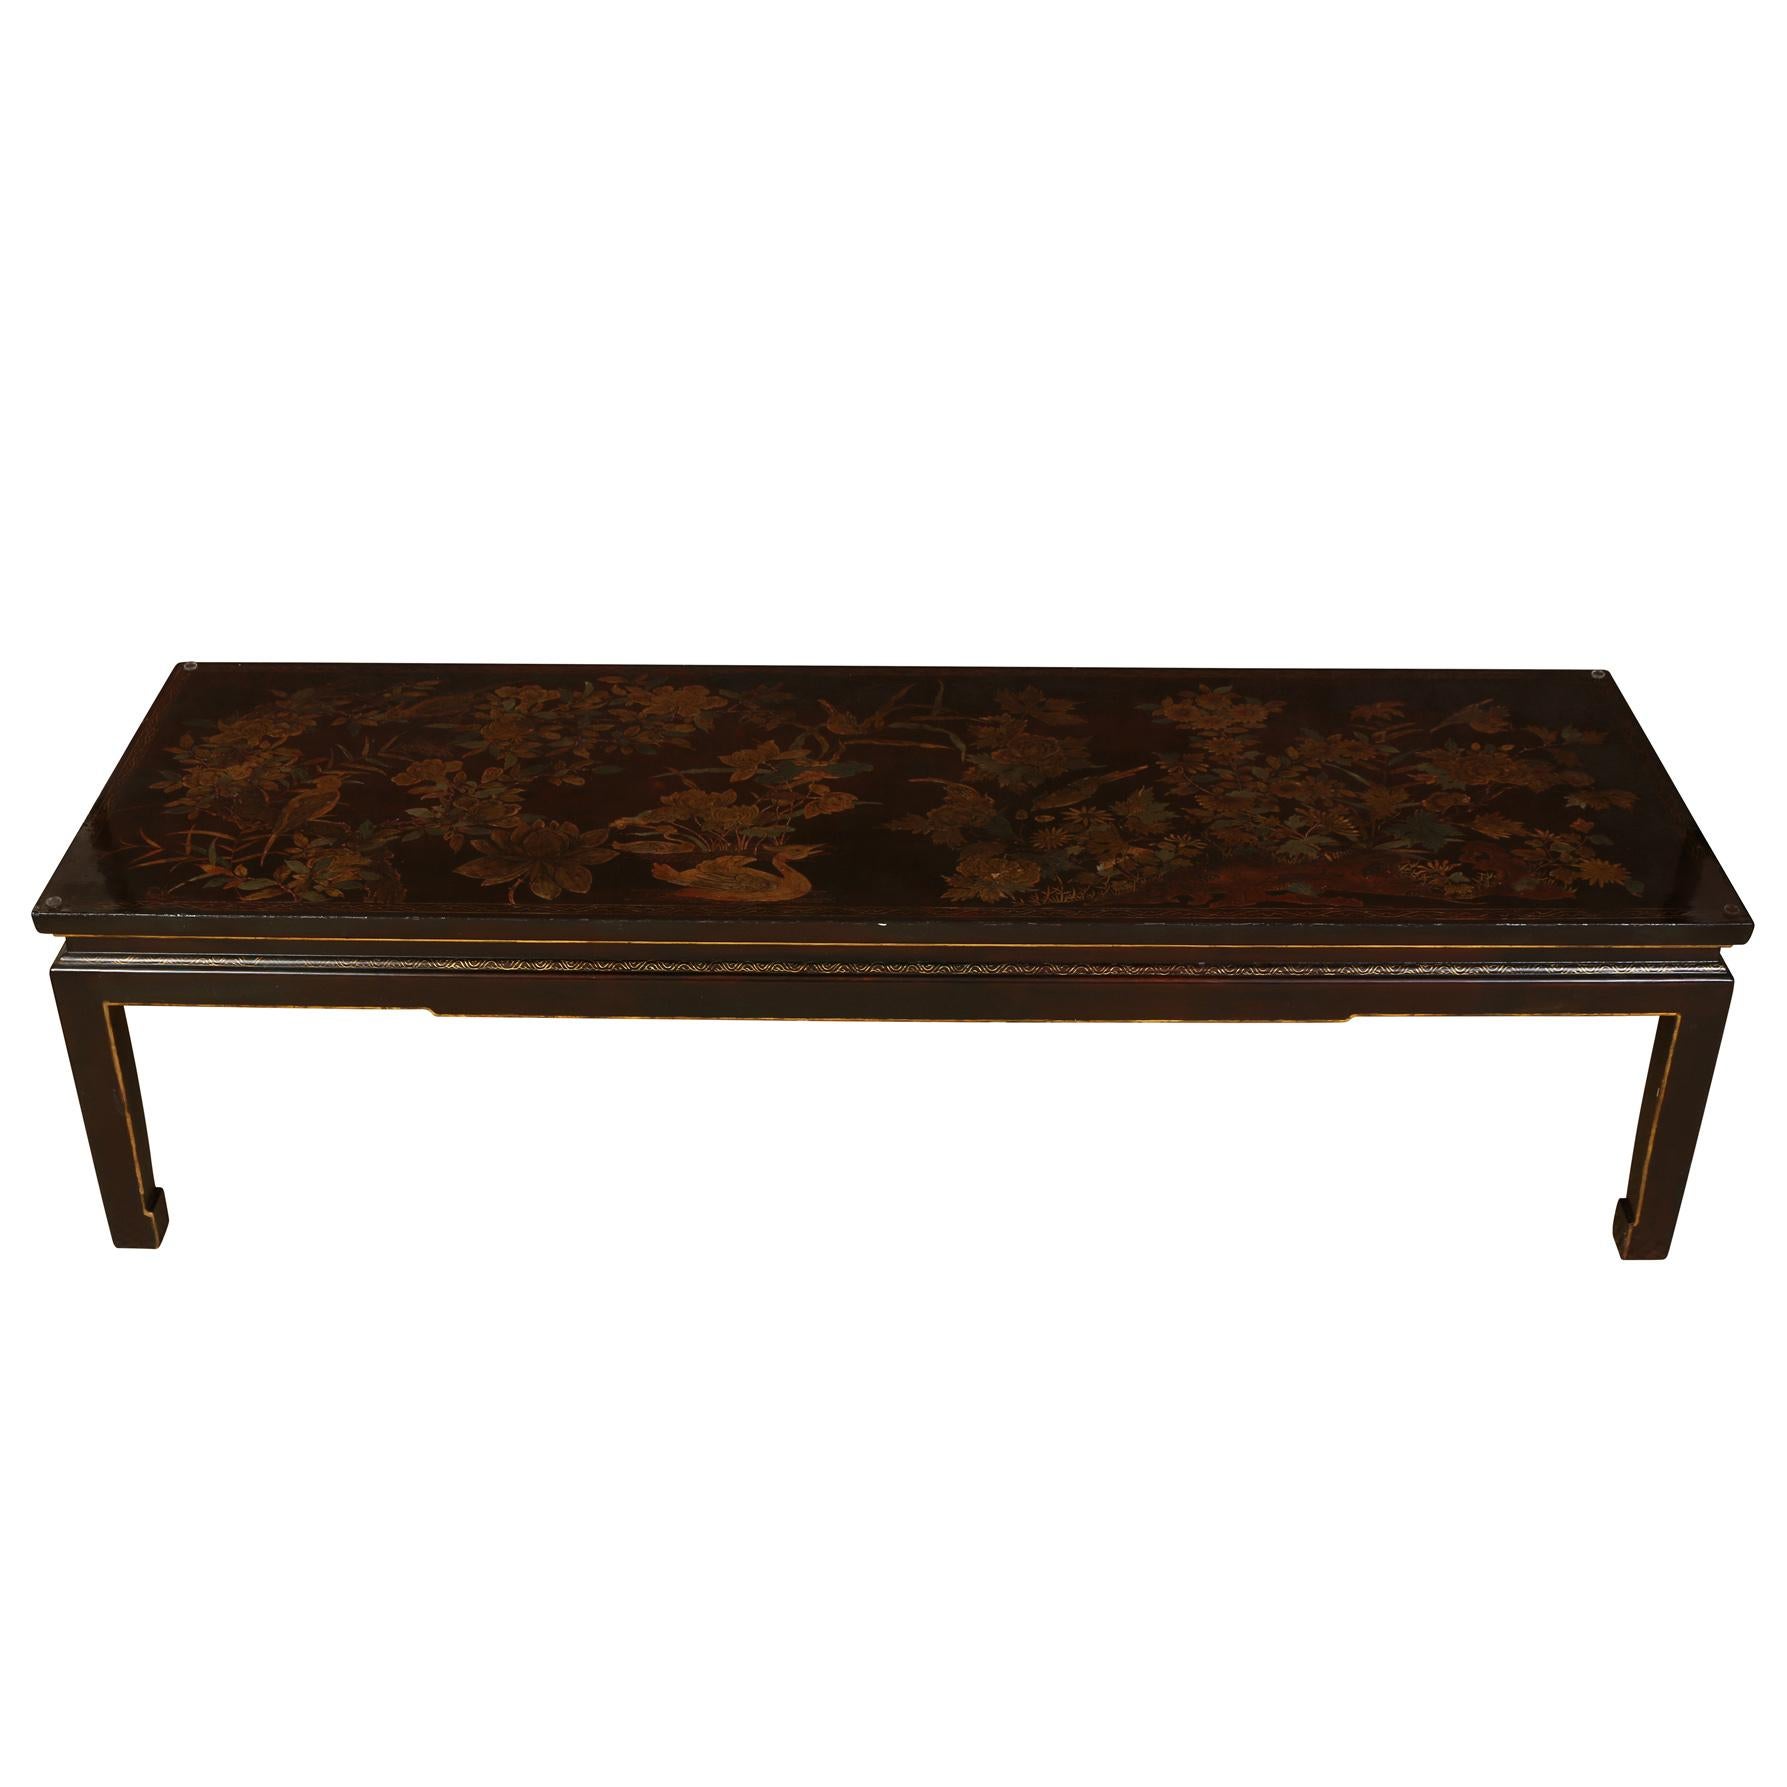 A vintage chinoiserie gilt decorated chocolate brown lacquered coffee table with a glass top.  Gilt decorations feature a floral motif with bouquets of flowers and birds.  Glass top makes this beautiful table functional in any room